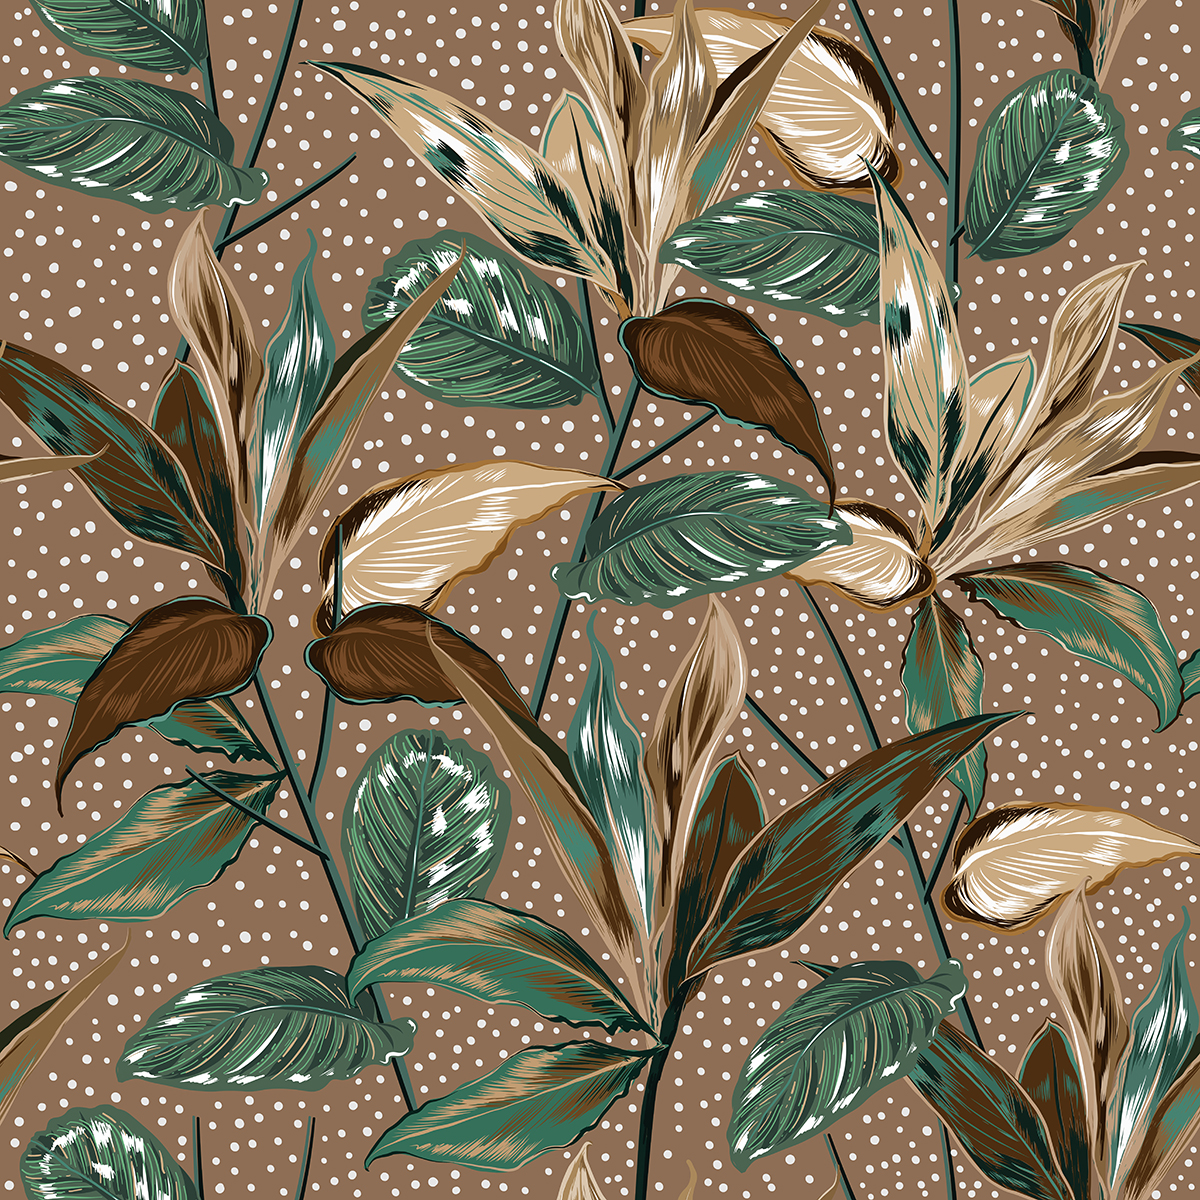 A pattern of leaves on a brown background